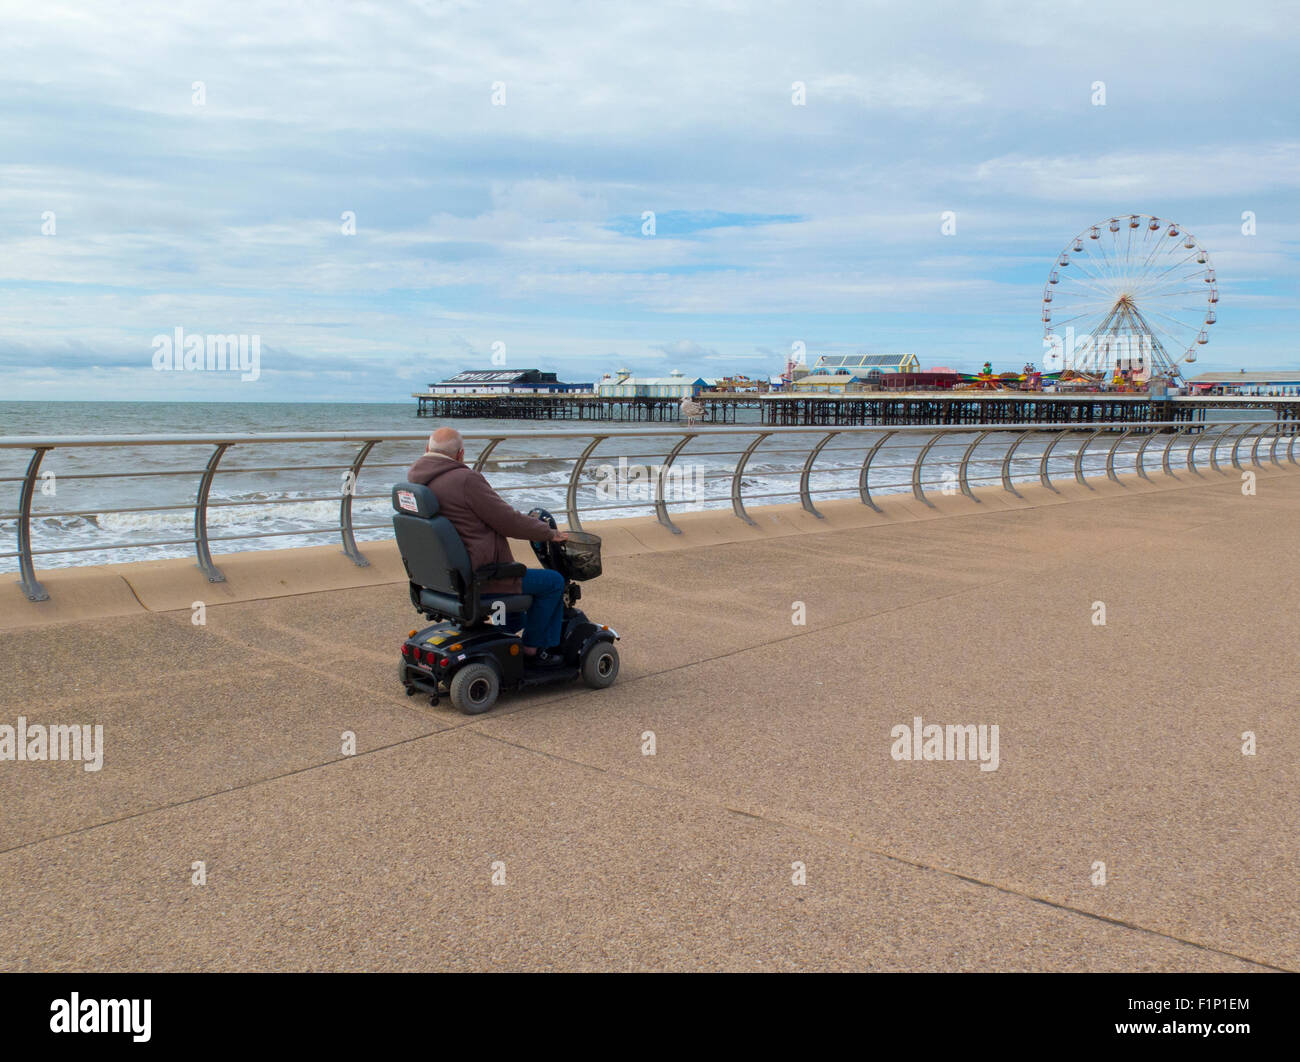 Disabled person on a scooter on Blackpool promenade Stock Photo